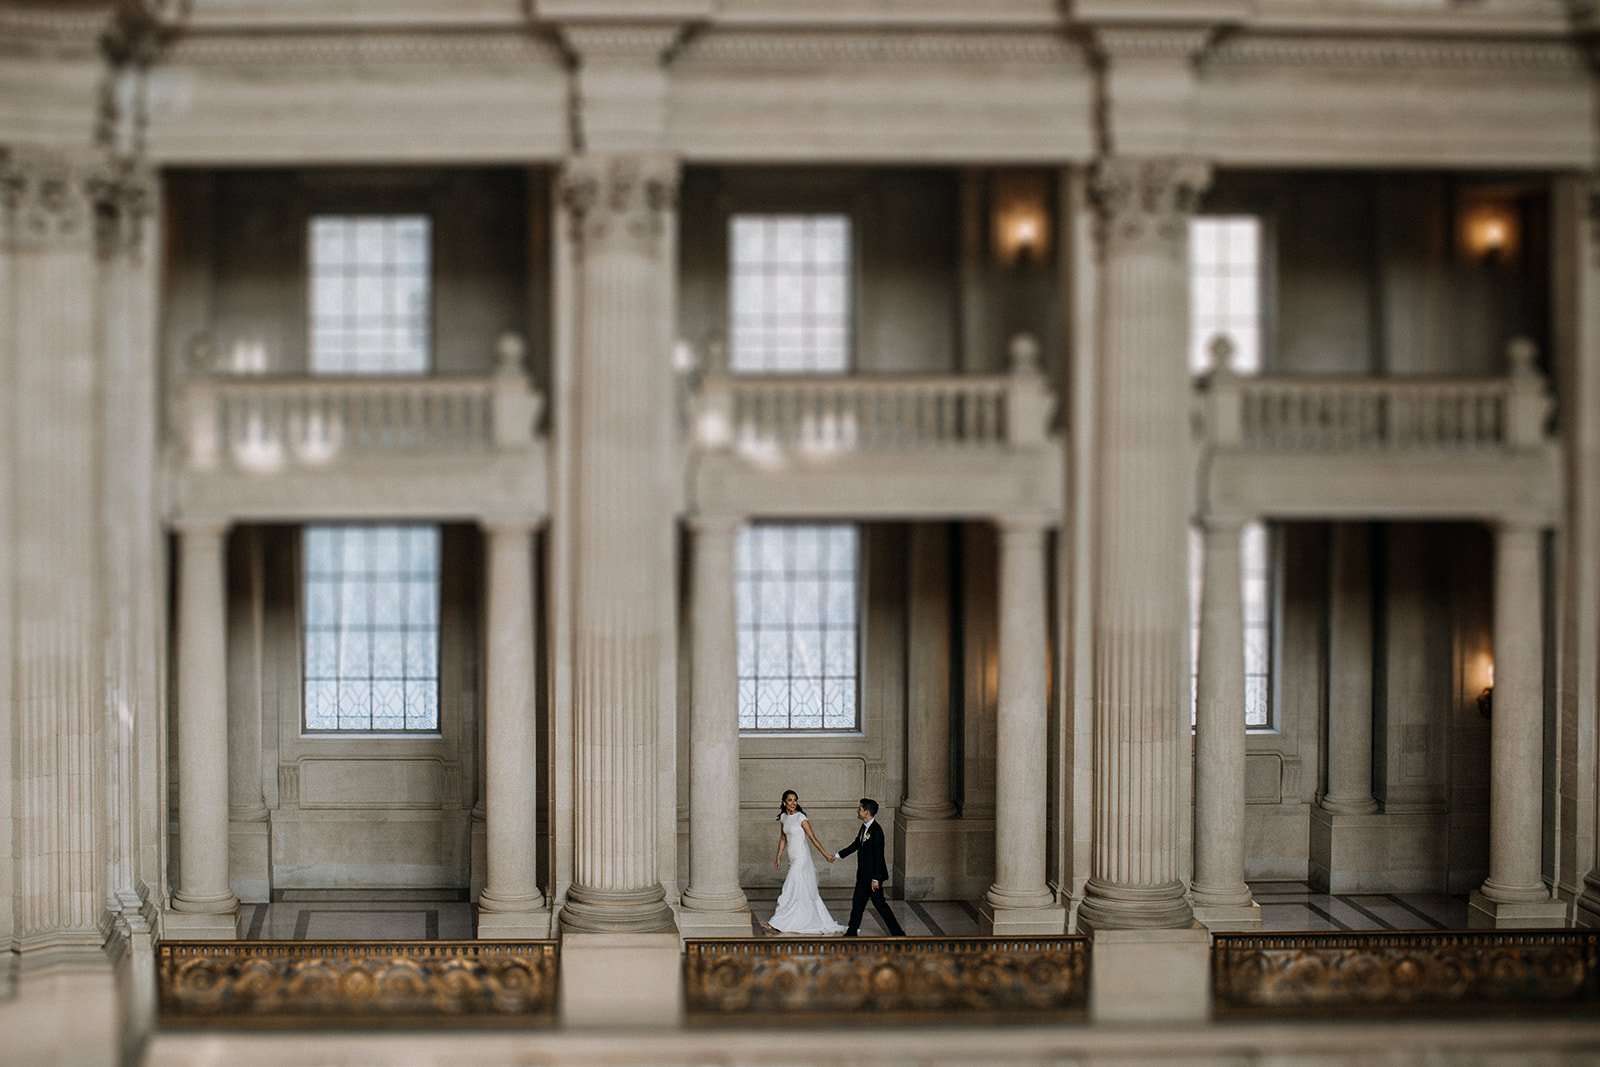  bride and groom walking holding hands in grand architecture  